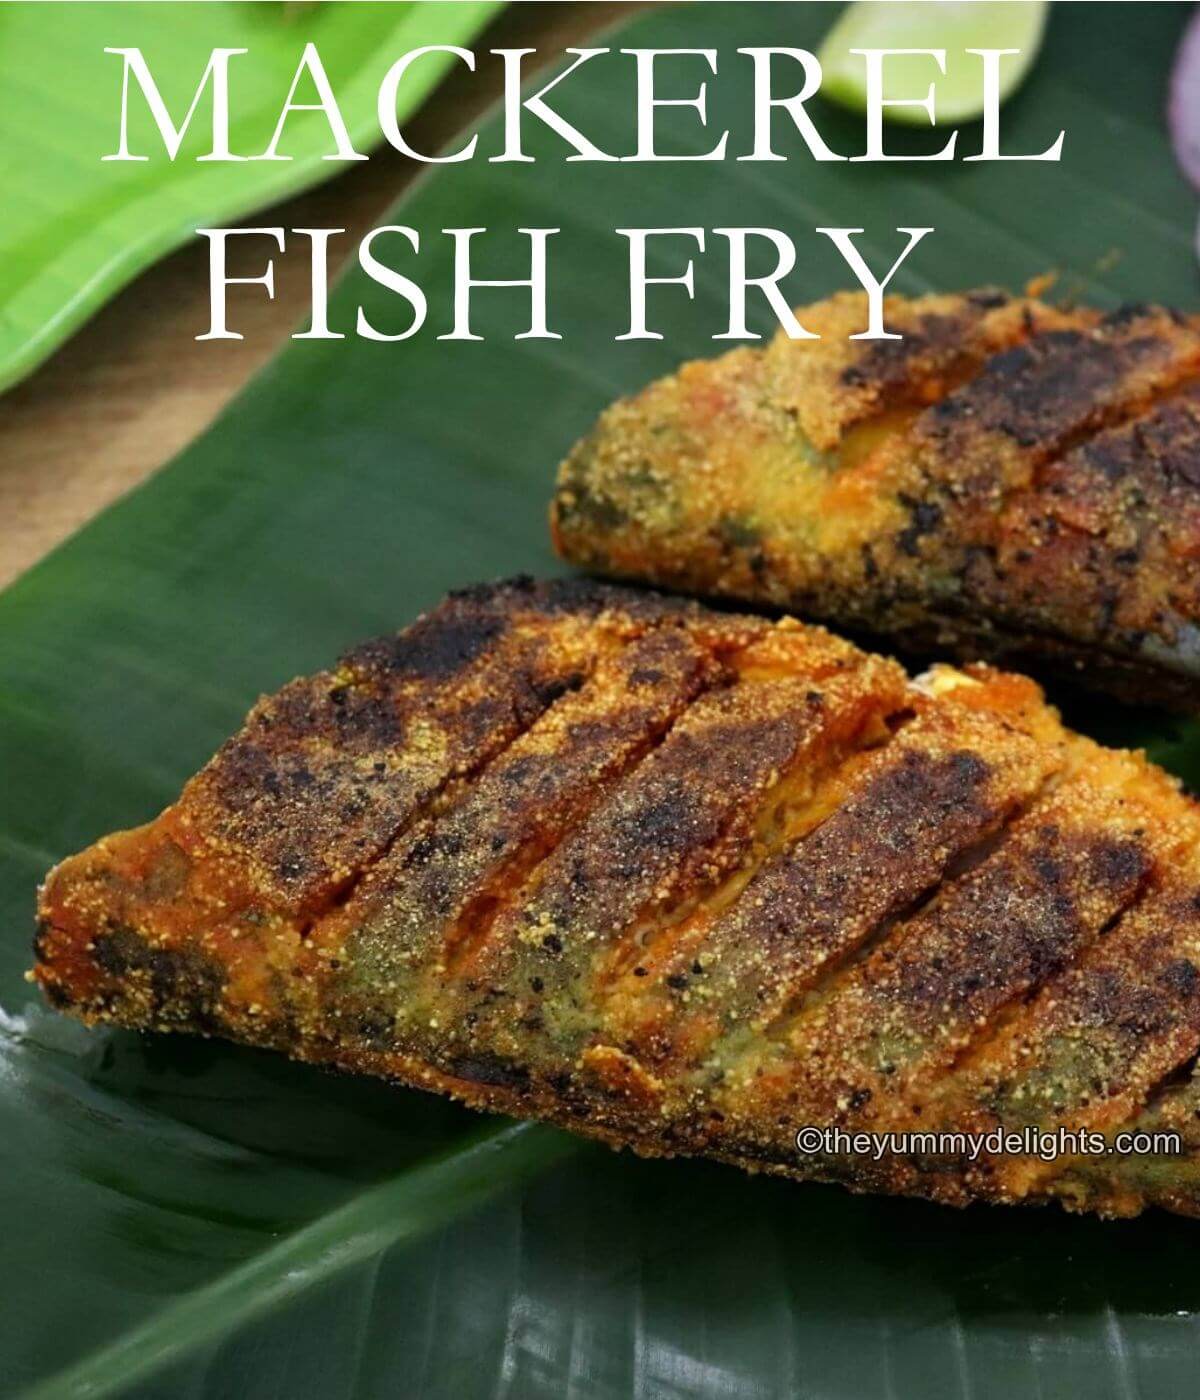 close-up of mackerel fish fry. Two fried mackerel fishes are placed next to each other on a banana leaf.